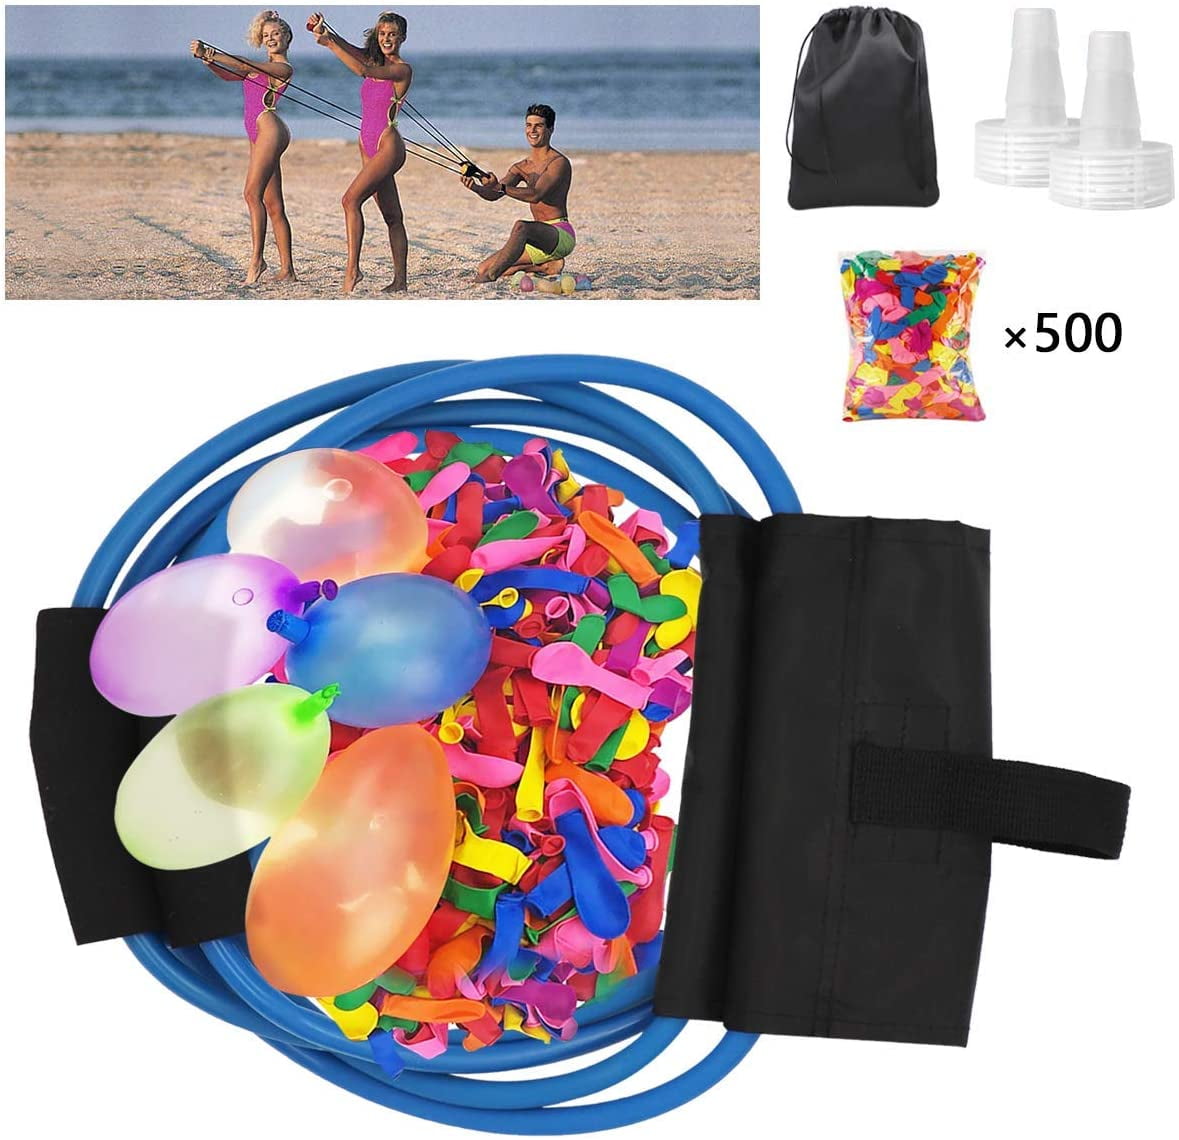 1 for Launcher Up To 500 Yards Water Balloon Launcher Kids Balloon Slingshot 